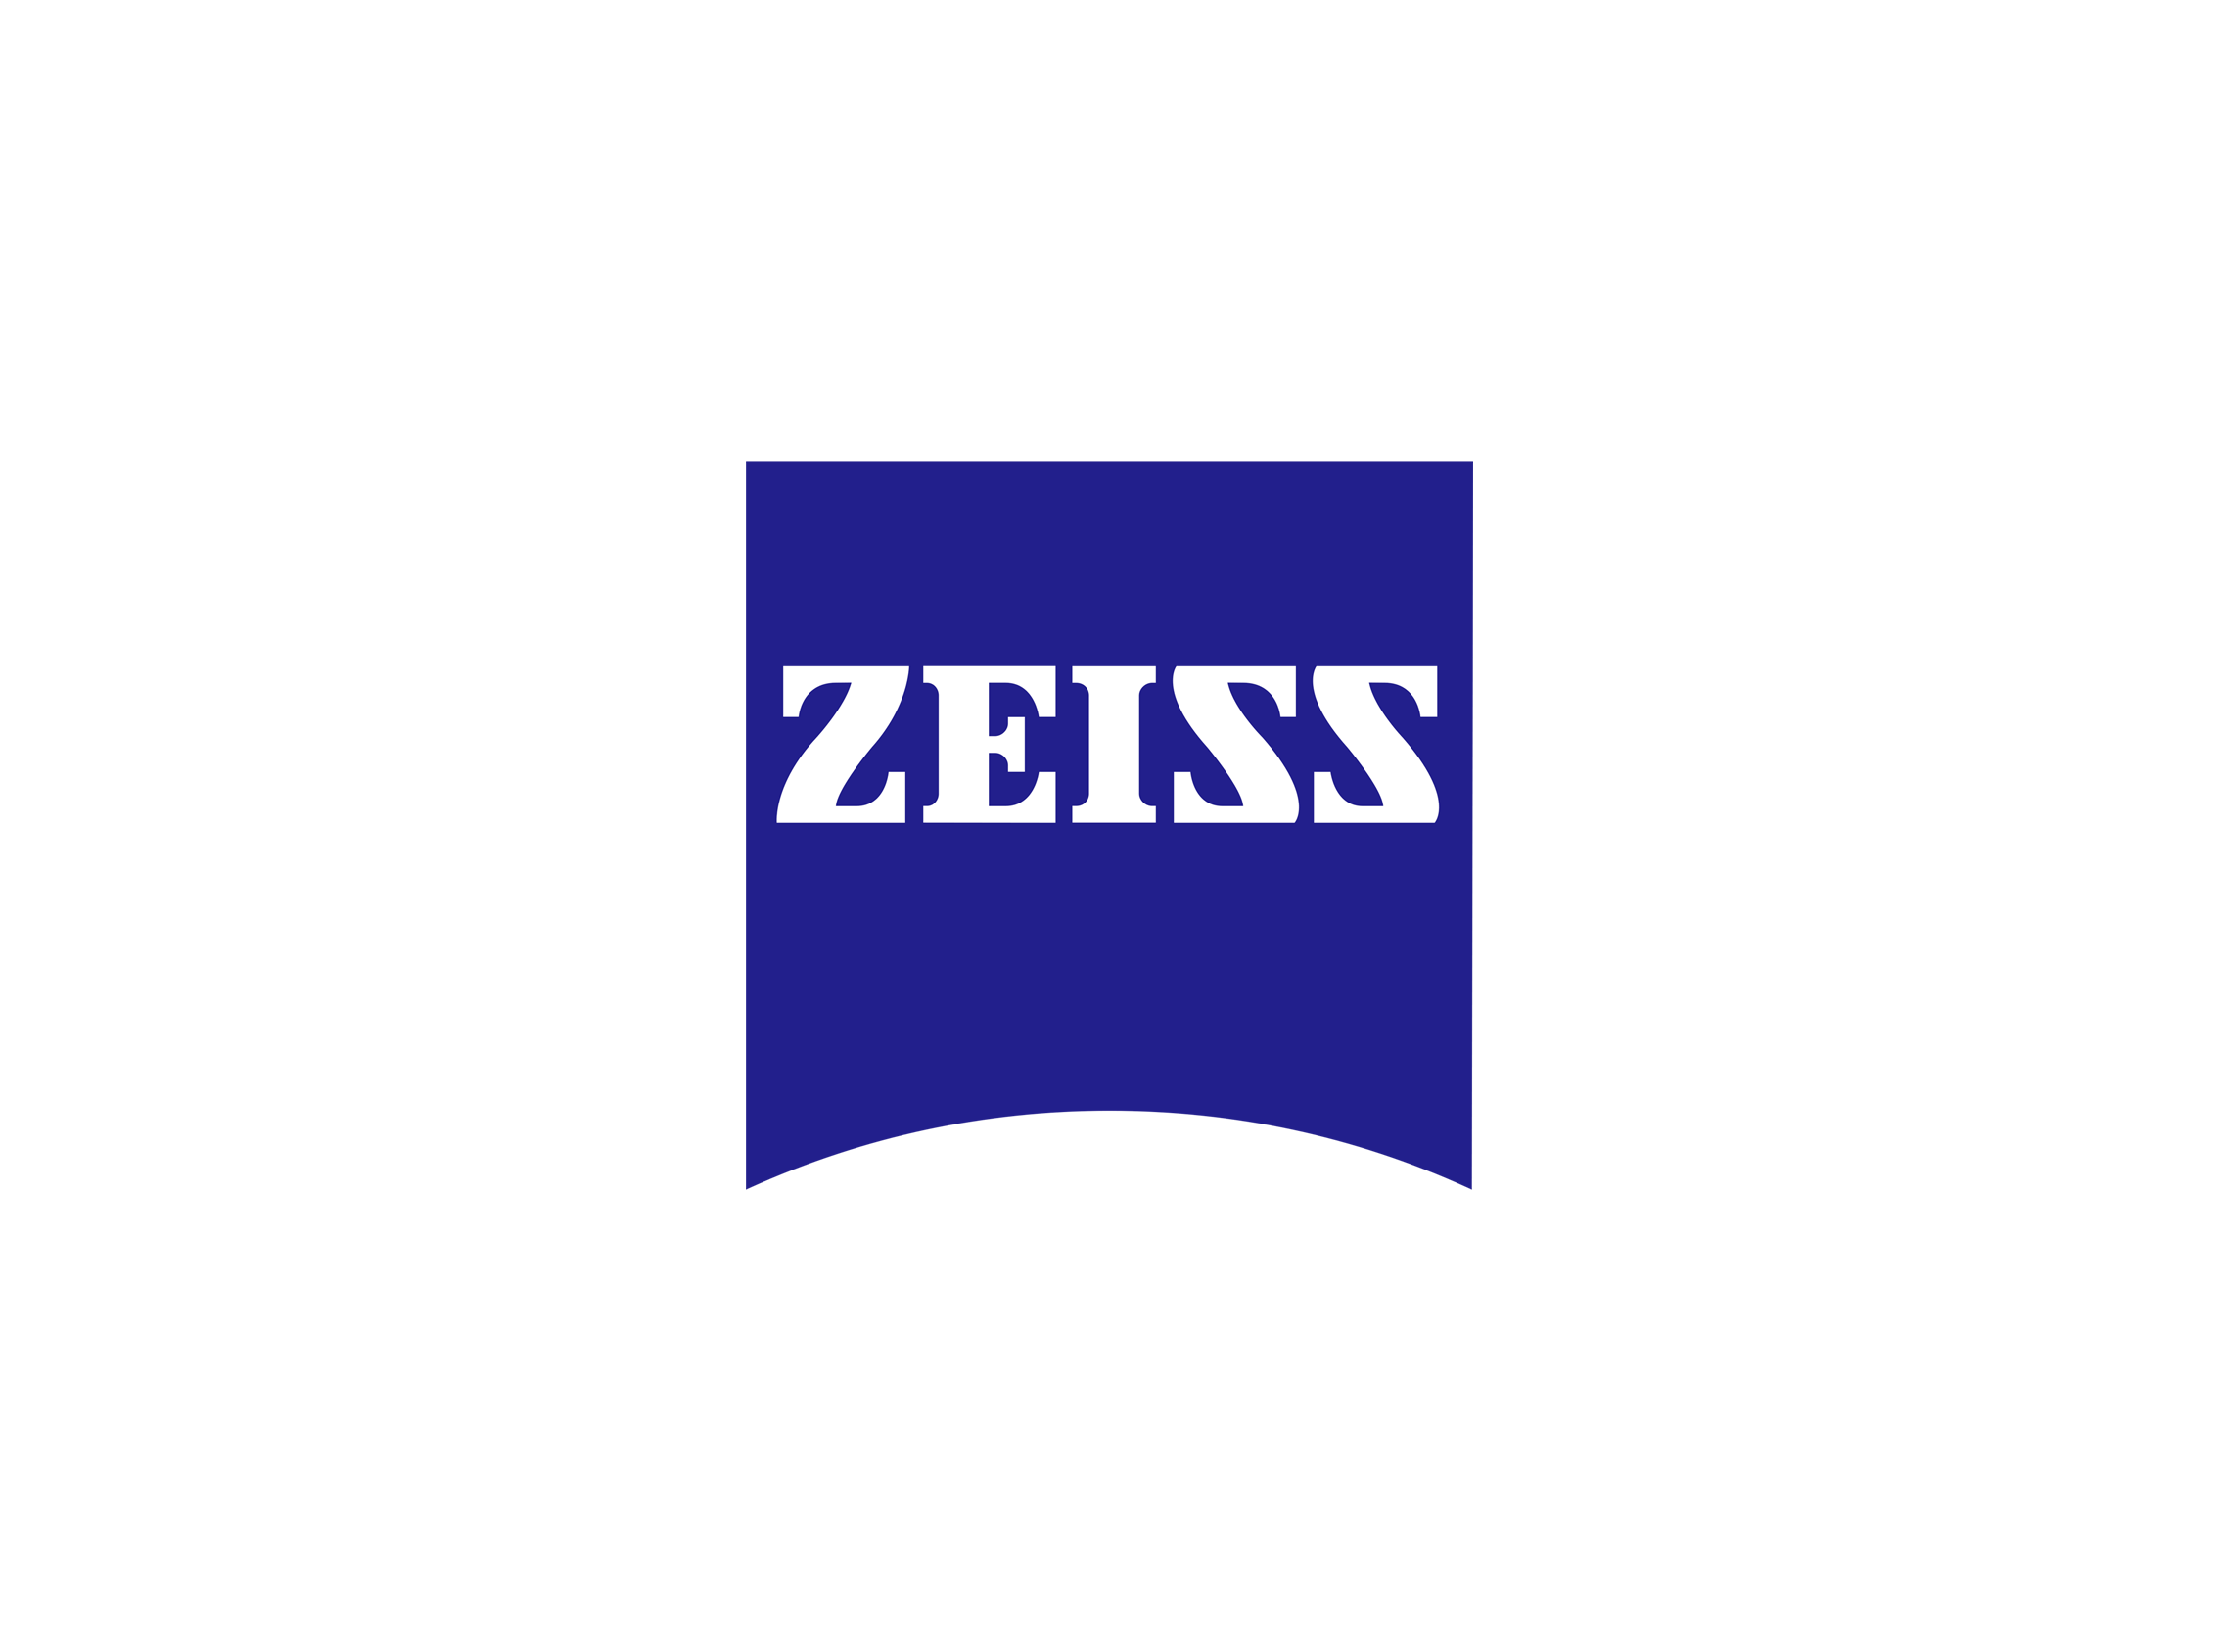 Zeiss_logo.png